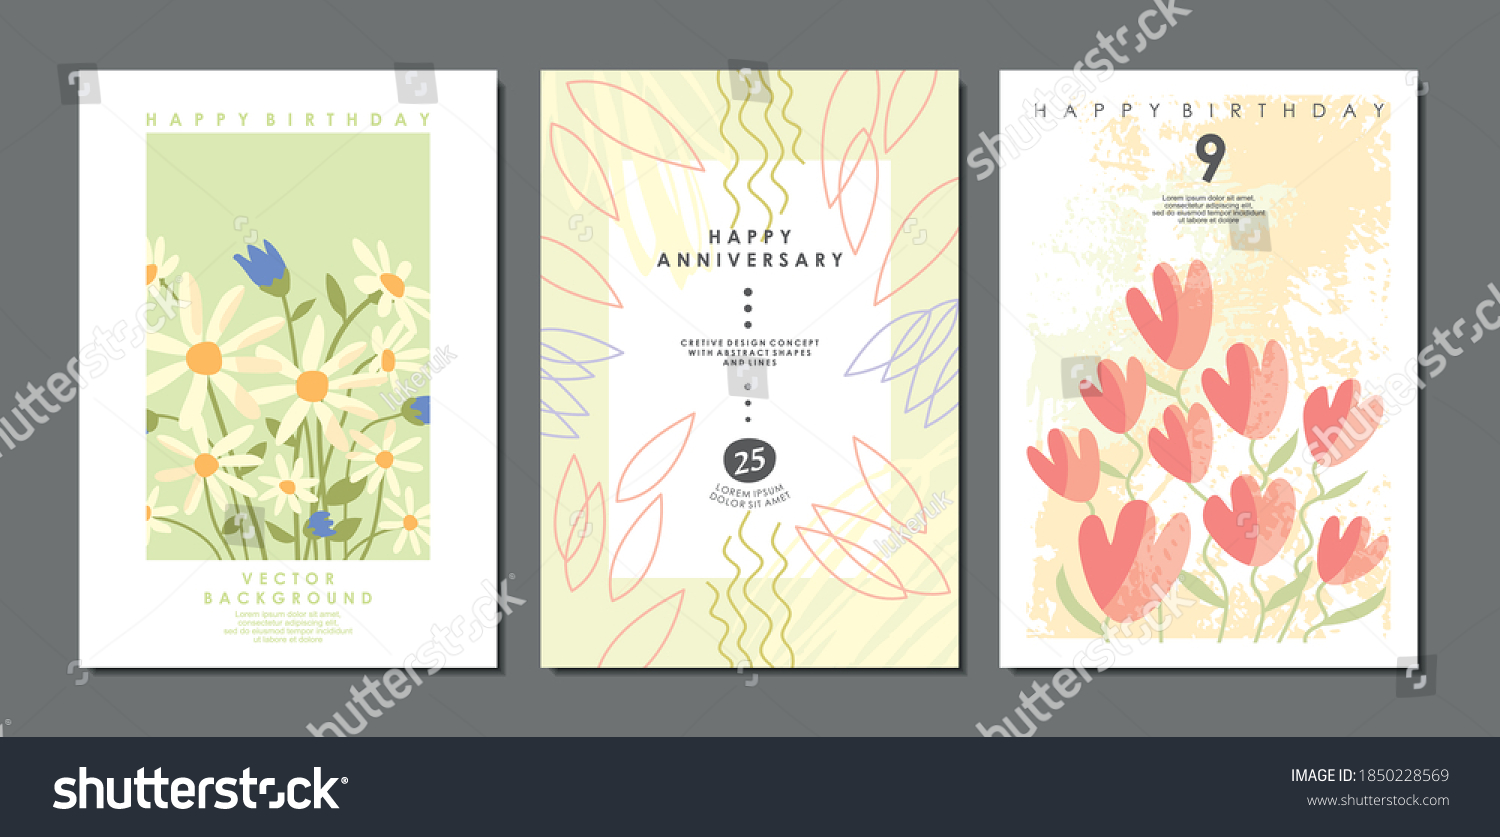 floral-birthday-mothers-day-or-anniversary-cards-templates-spring-flowers-cover-backgrounds